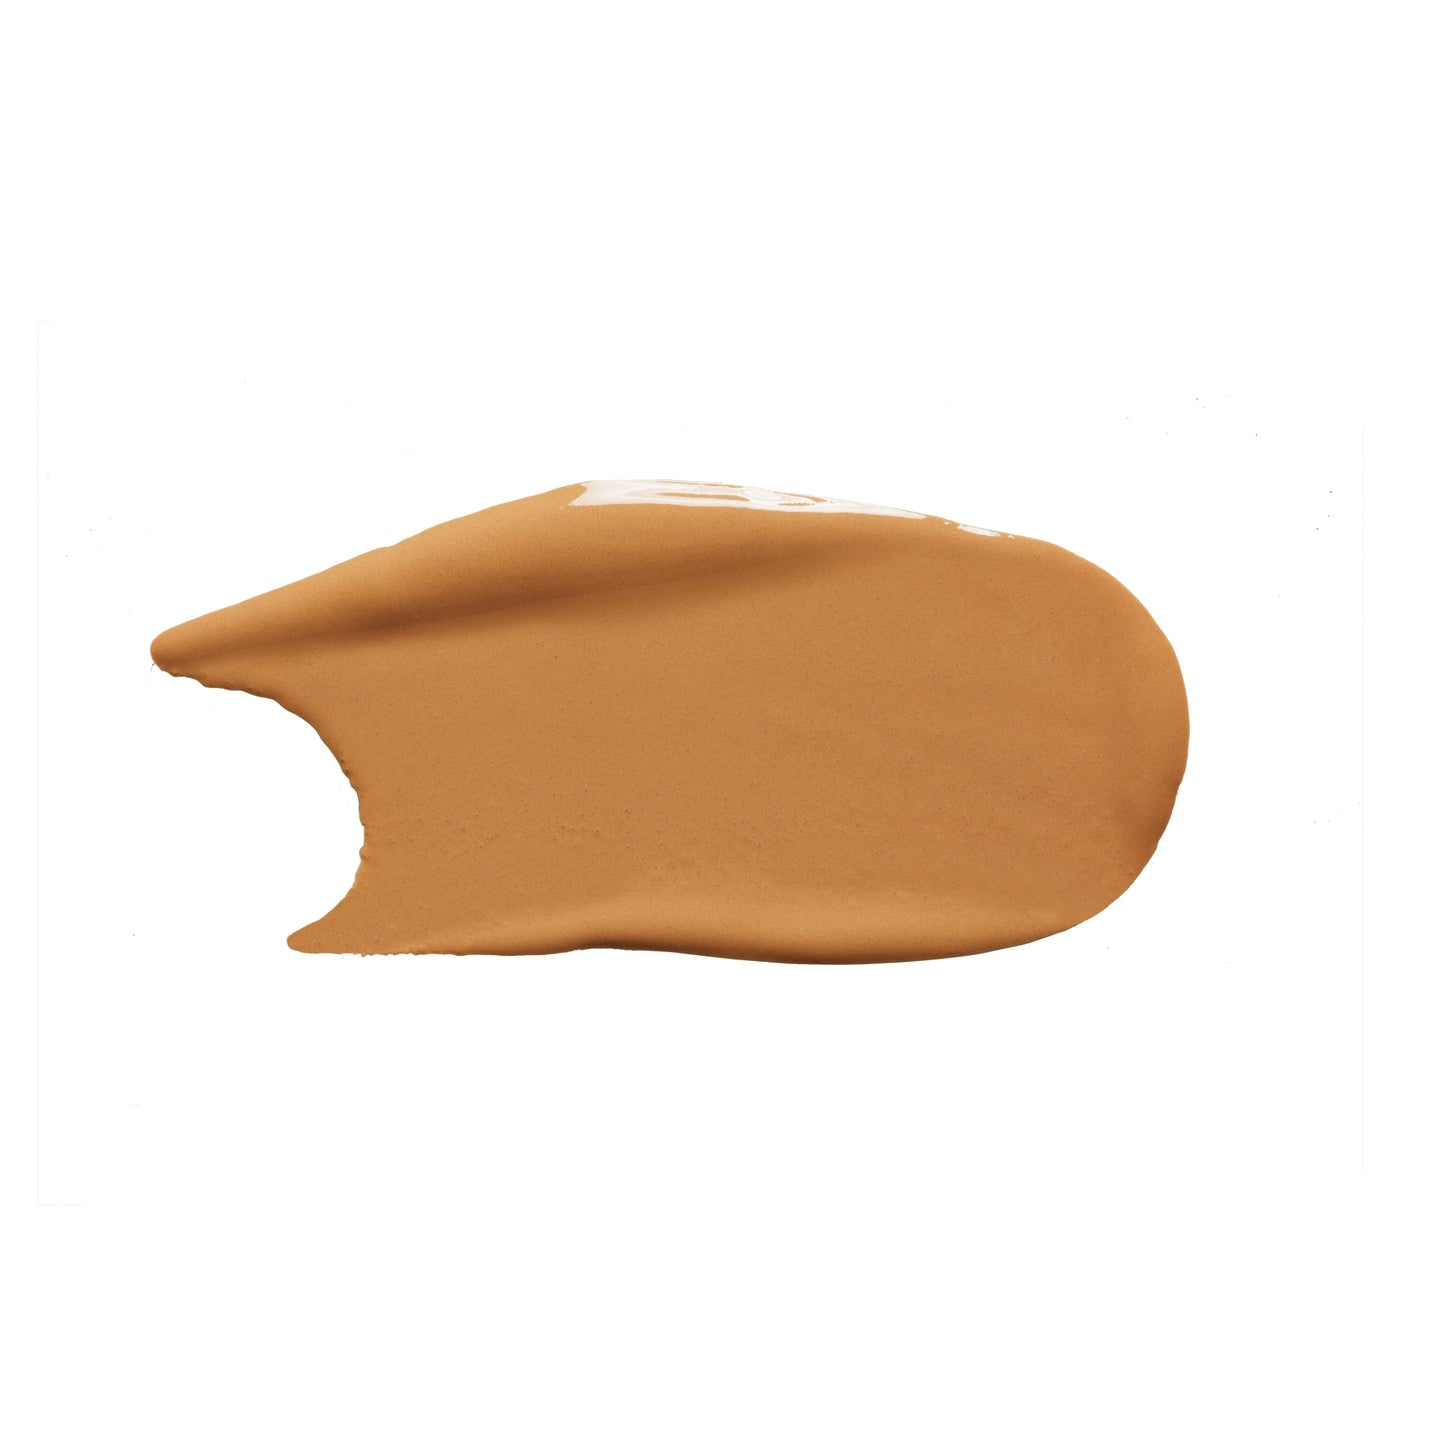 100% PURE Fruit Pigmented 2nd Skin Concealer shade 5